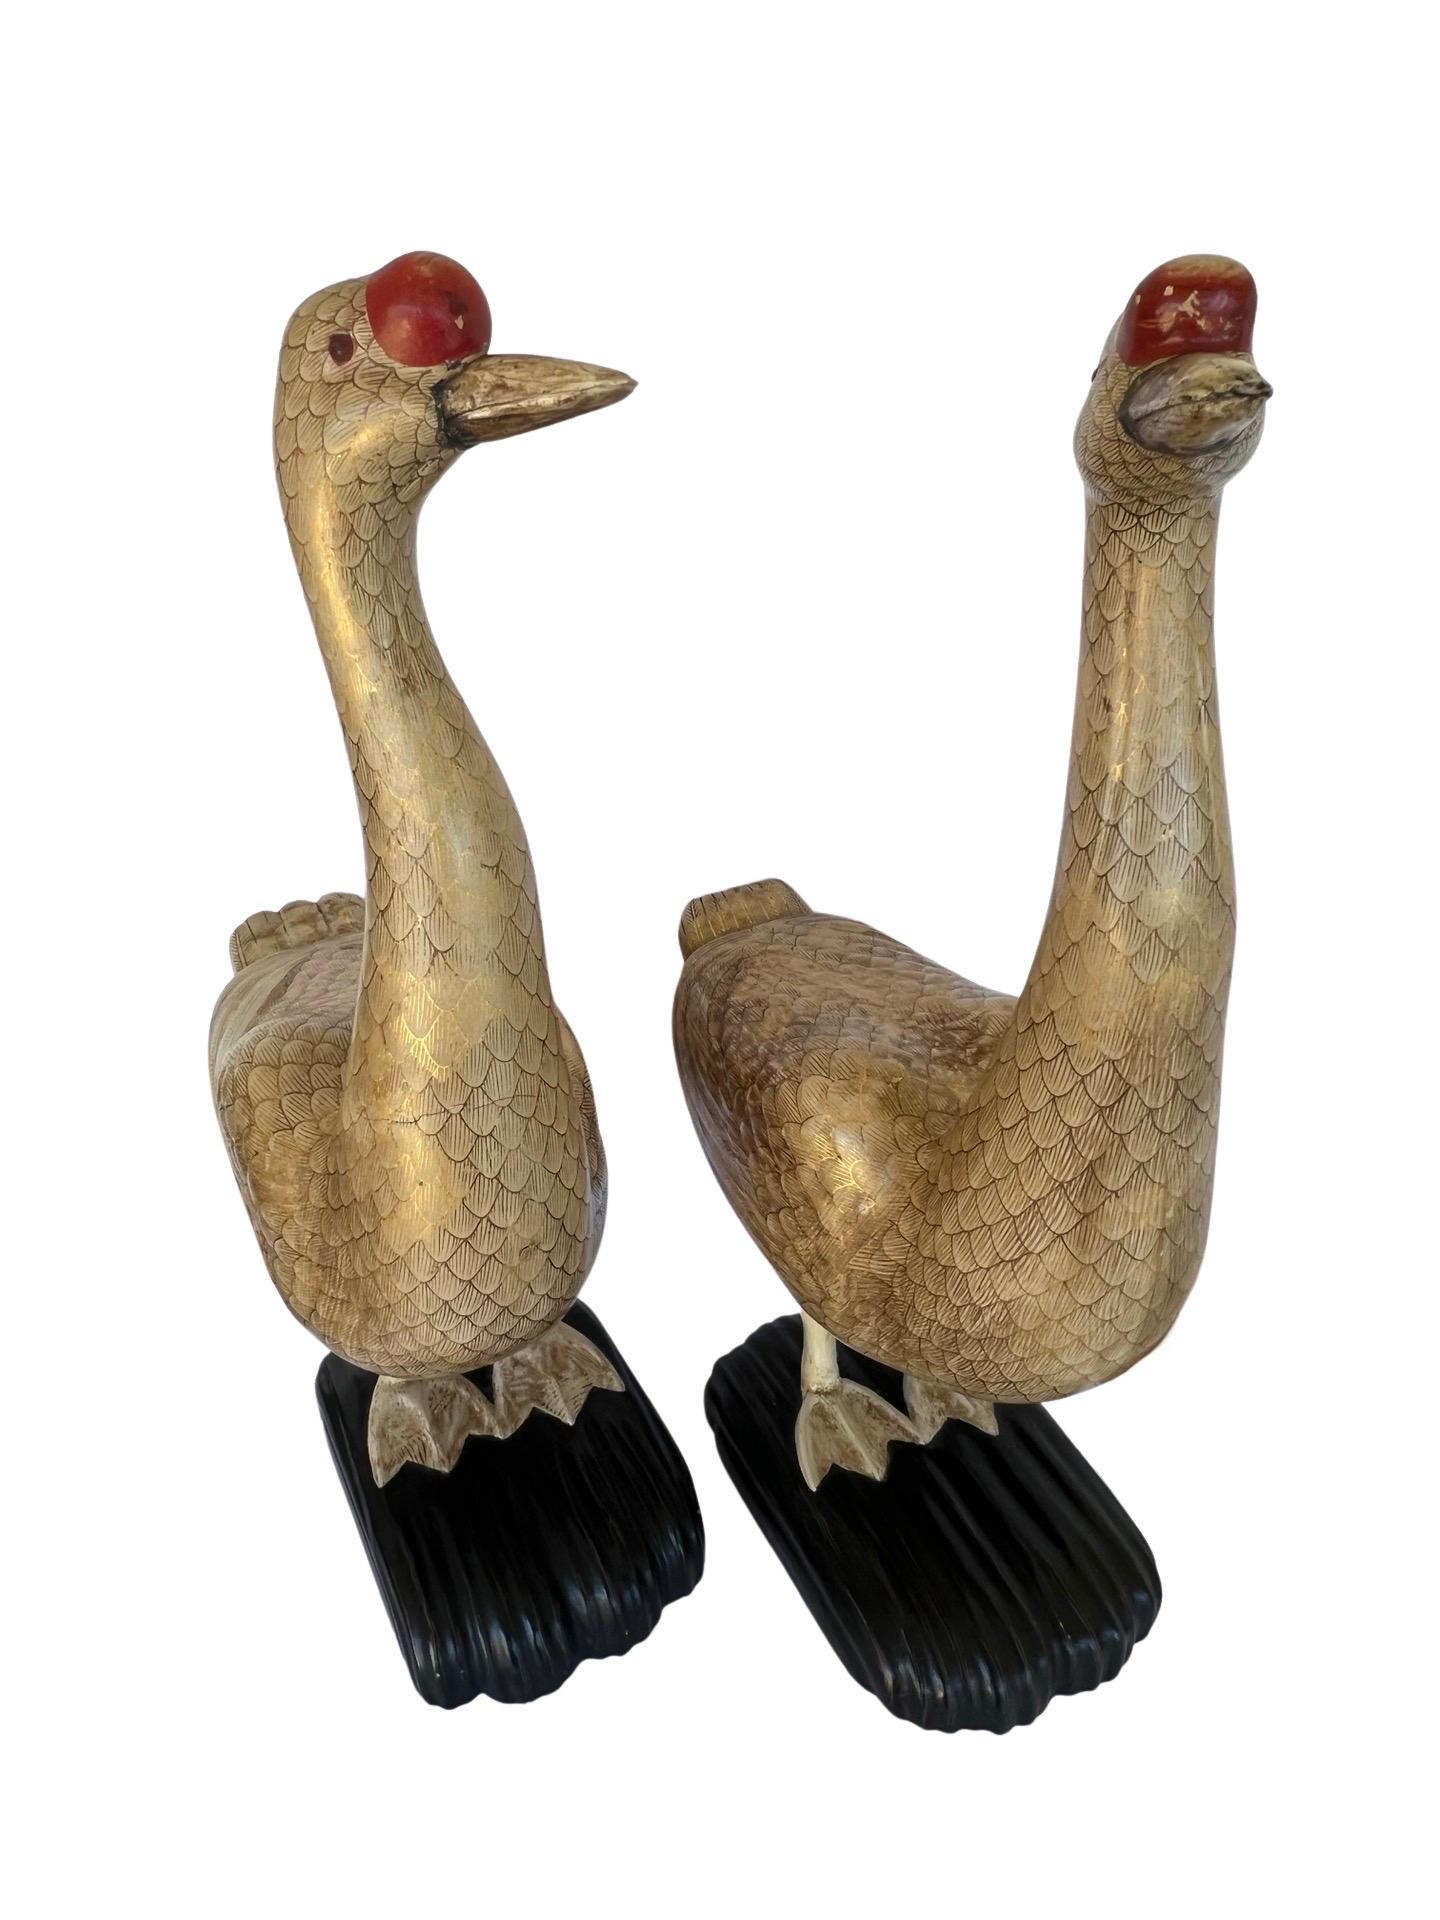 Presented are a pair of extremely rare Chinese Export carved wood, gilt and lacquered geese statues. Fine quality carvings that are a true opposing pair and high quality. From the estate of a former Georgia governor.